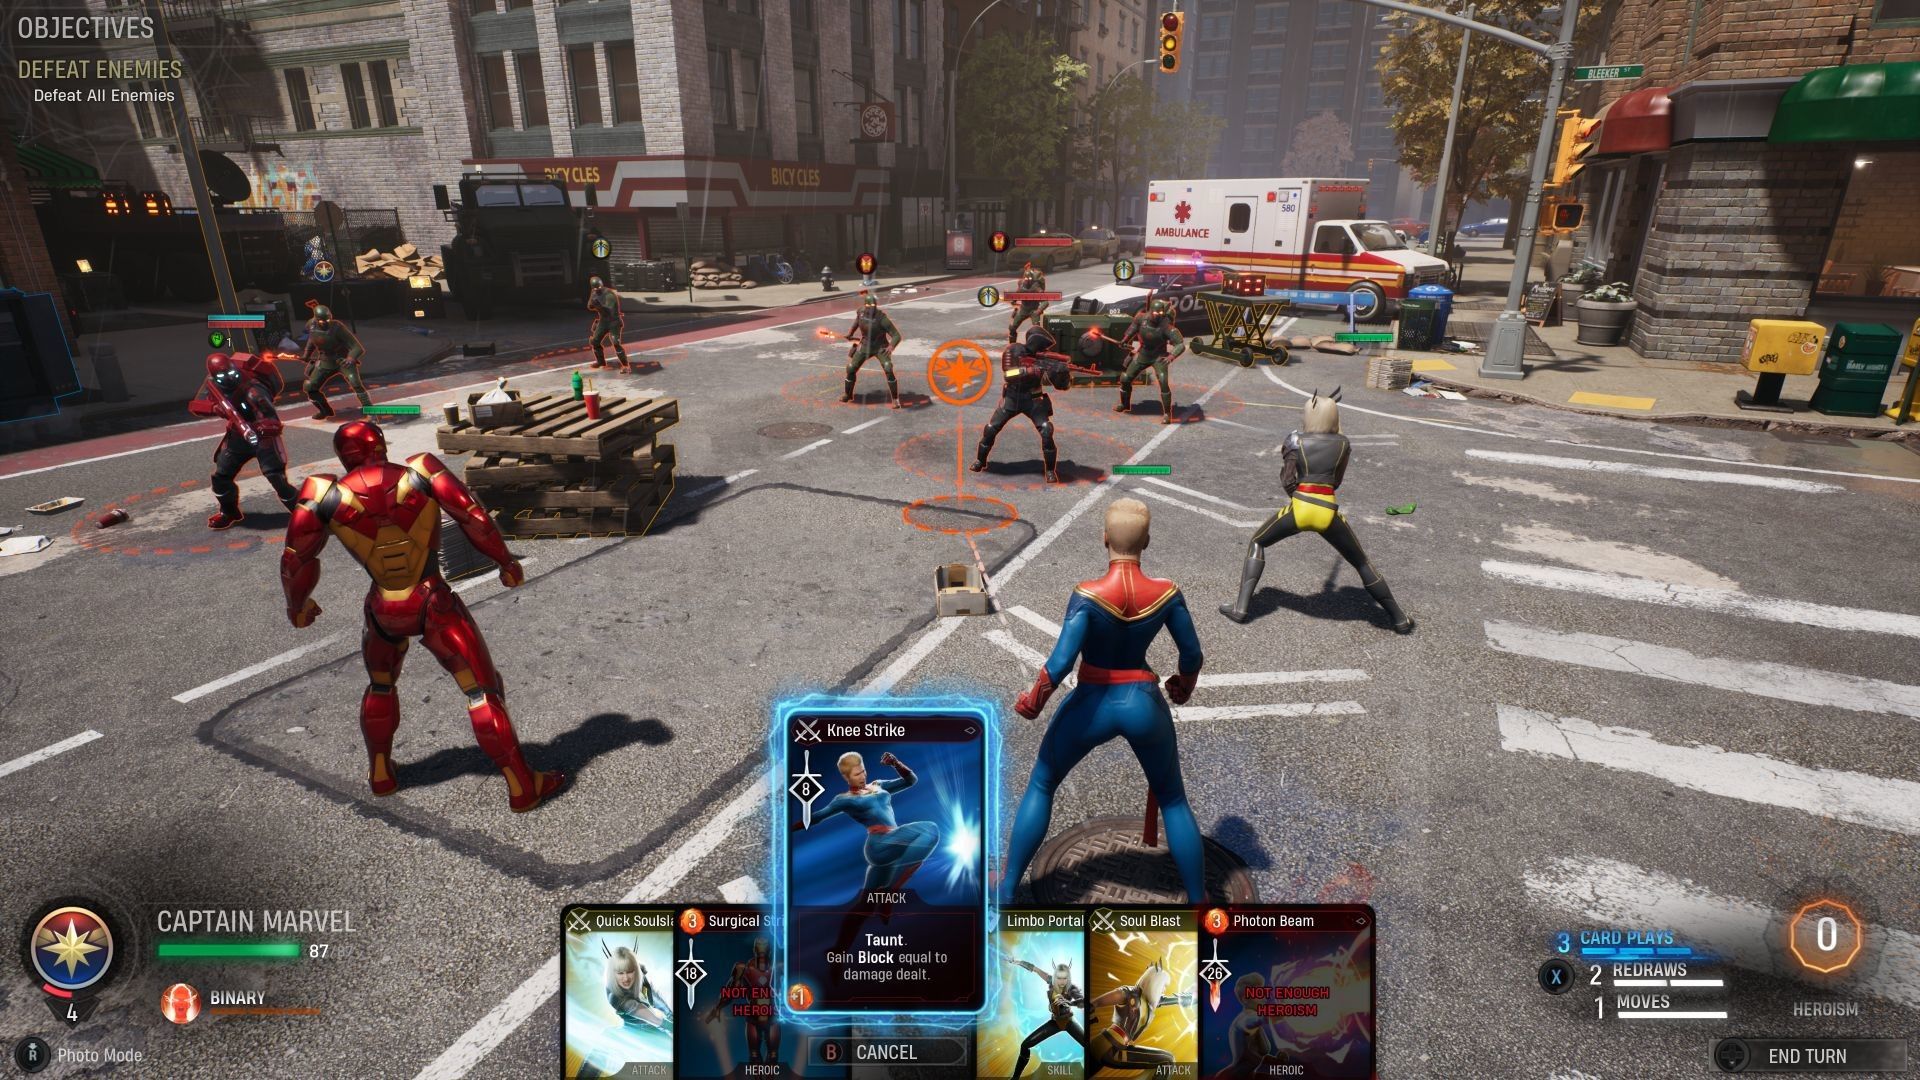 Video game screenshot of Marvel super-heroes facing off with villains in a city intersection